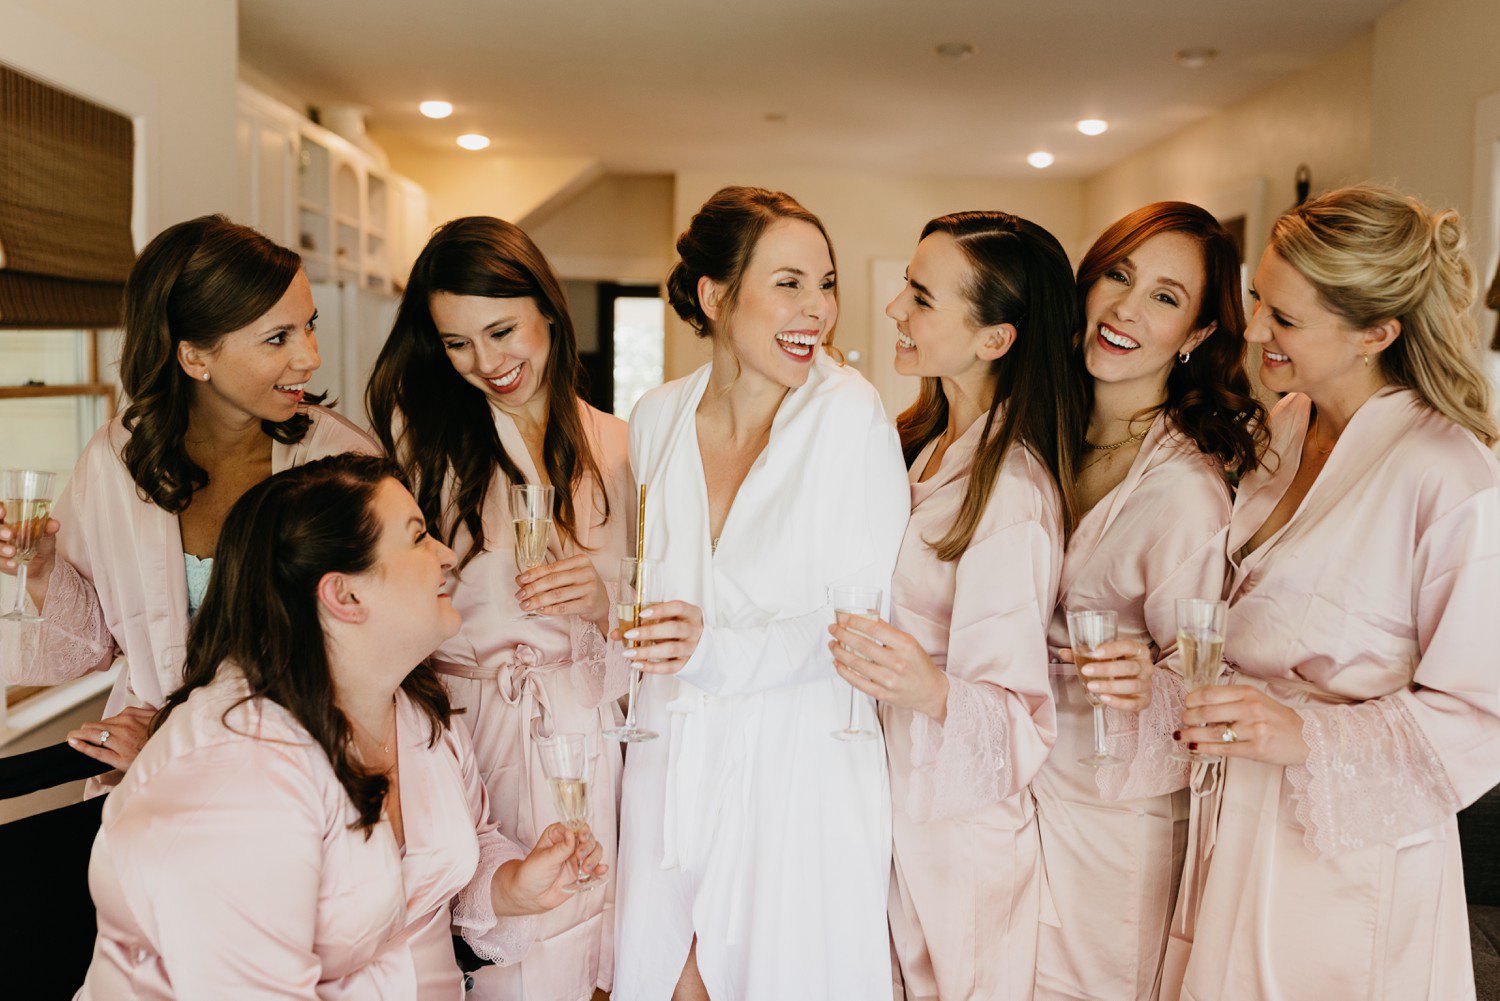 Bride and bridesmaids robe photos with champagne